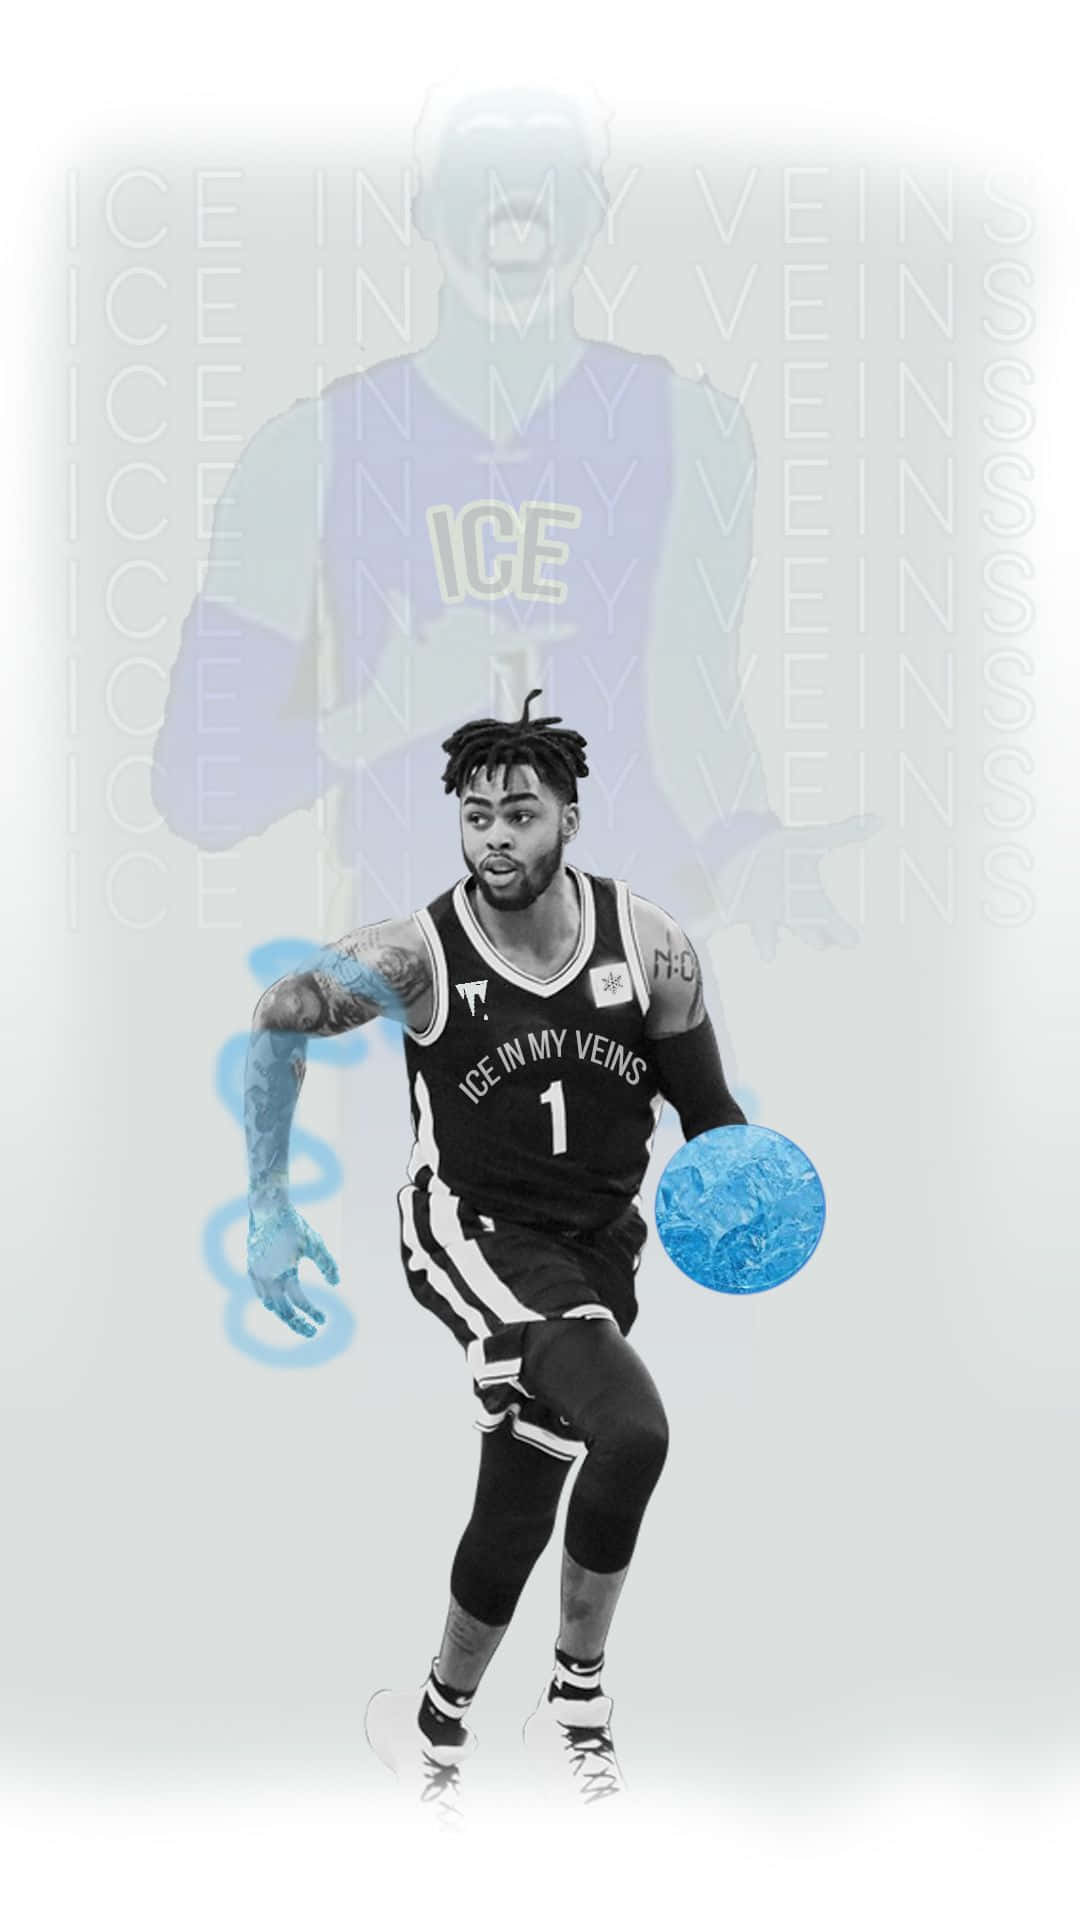 Professional basketball player D'Angelo Russell in action Wallpaper